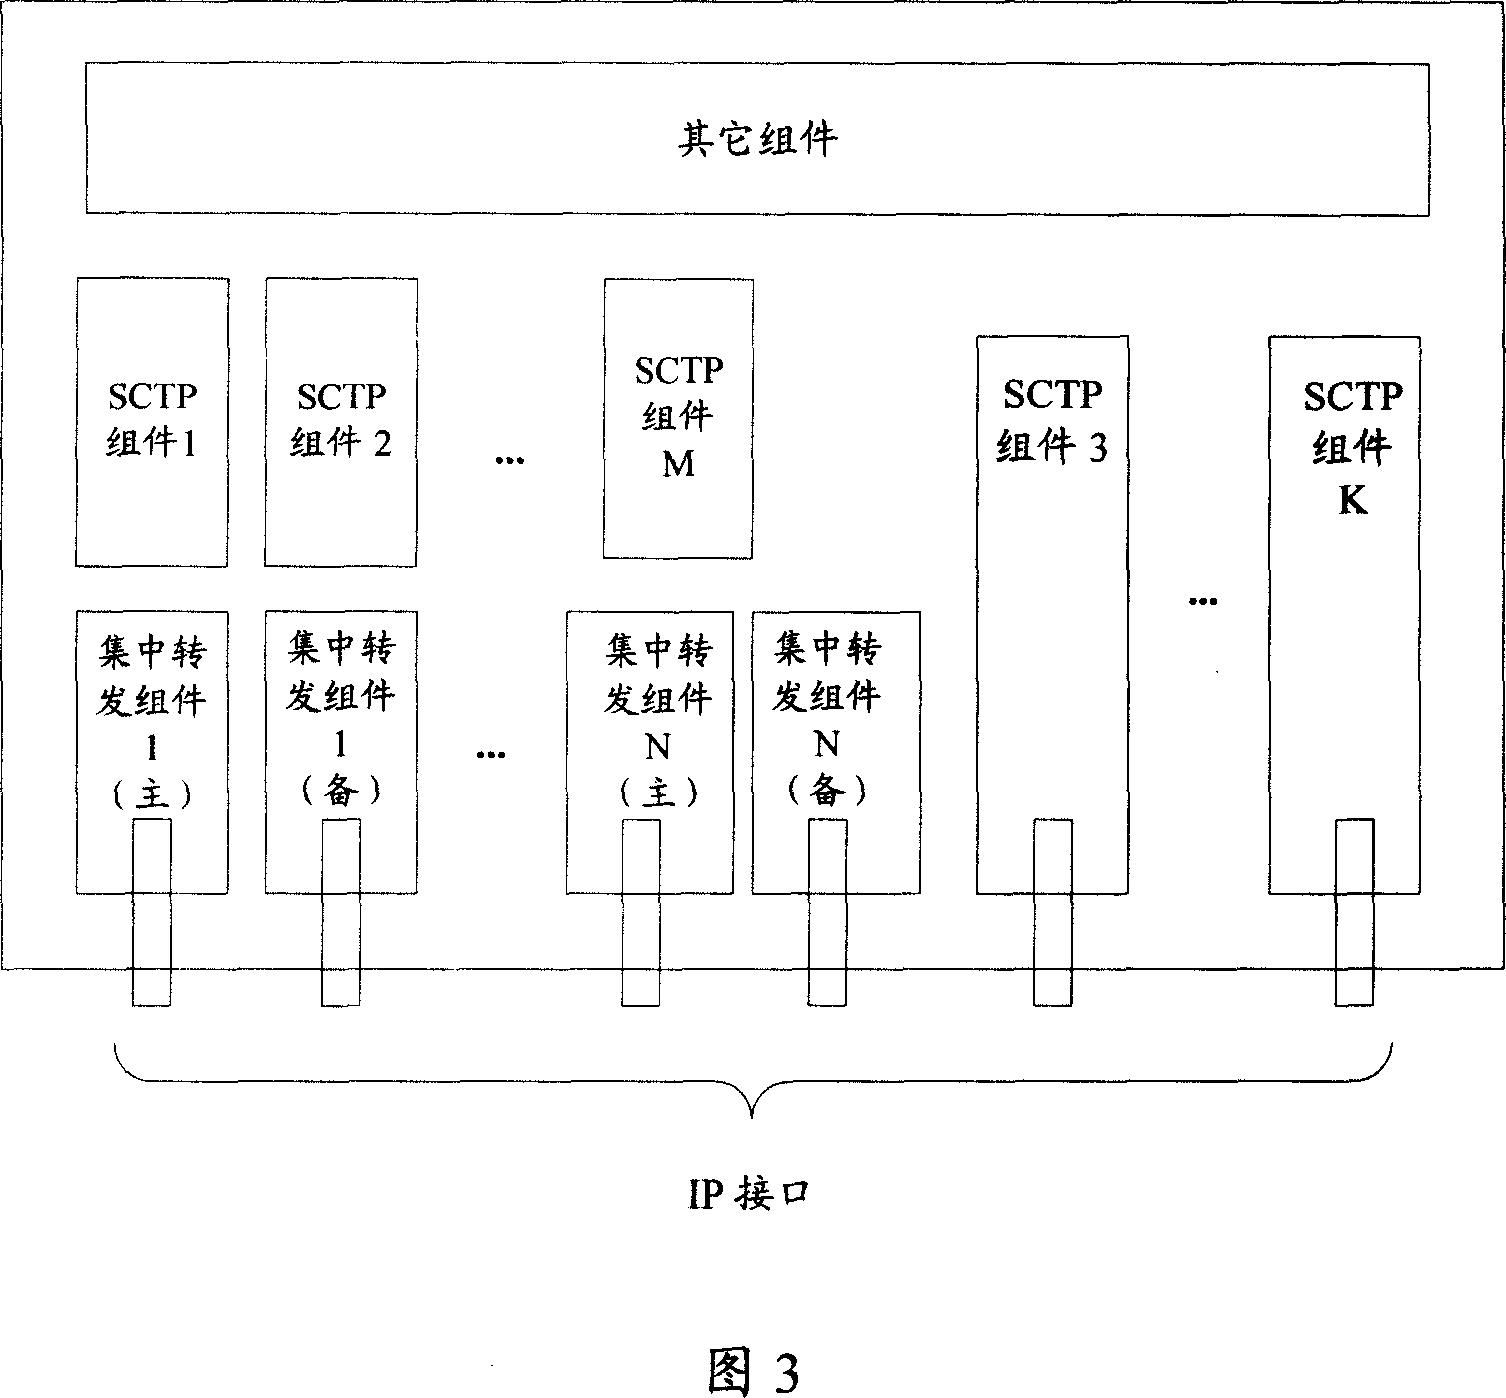 A system and method for realizing the multi-homing feature of stream control transmission protocol